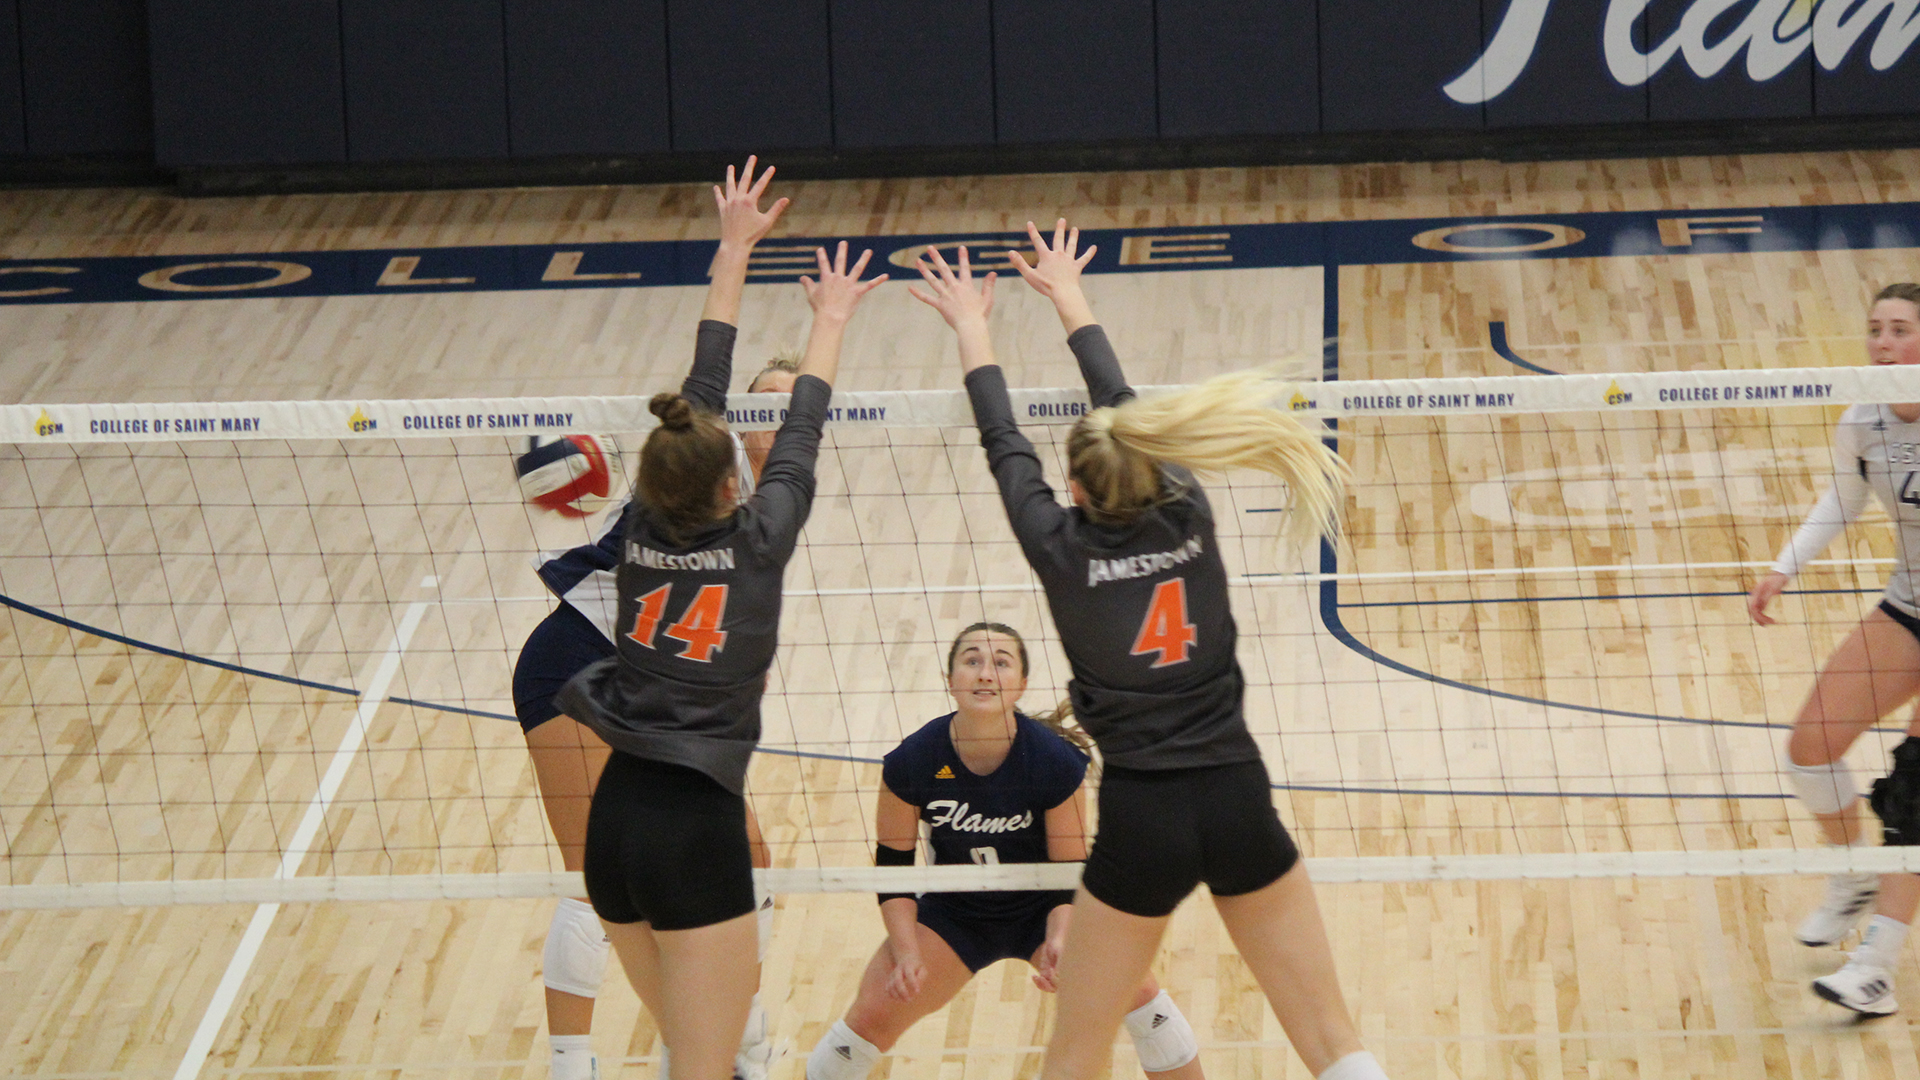 Second-ranked Jimmies defeat No. 13 Flames in five